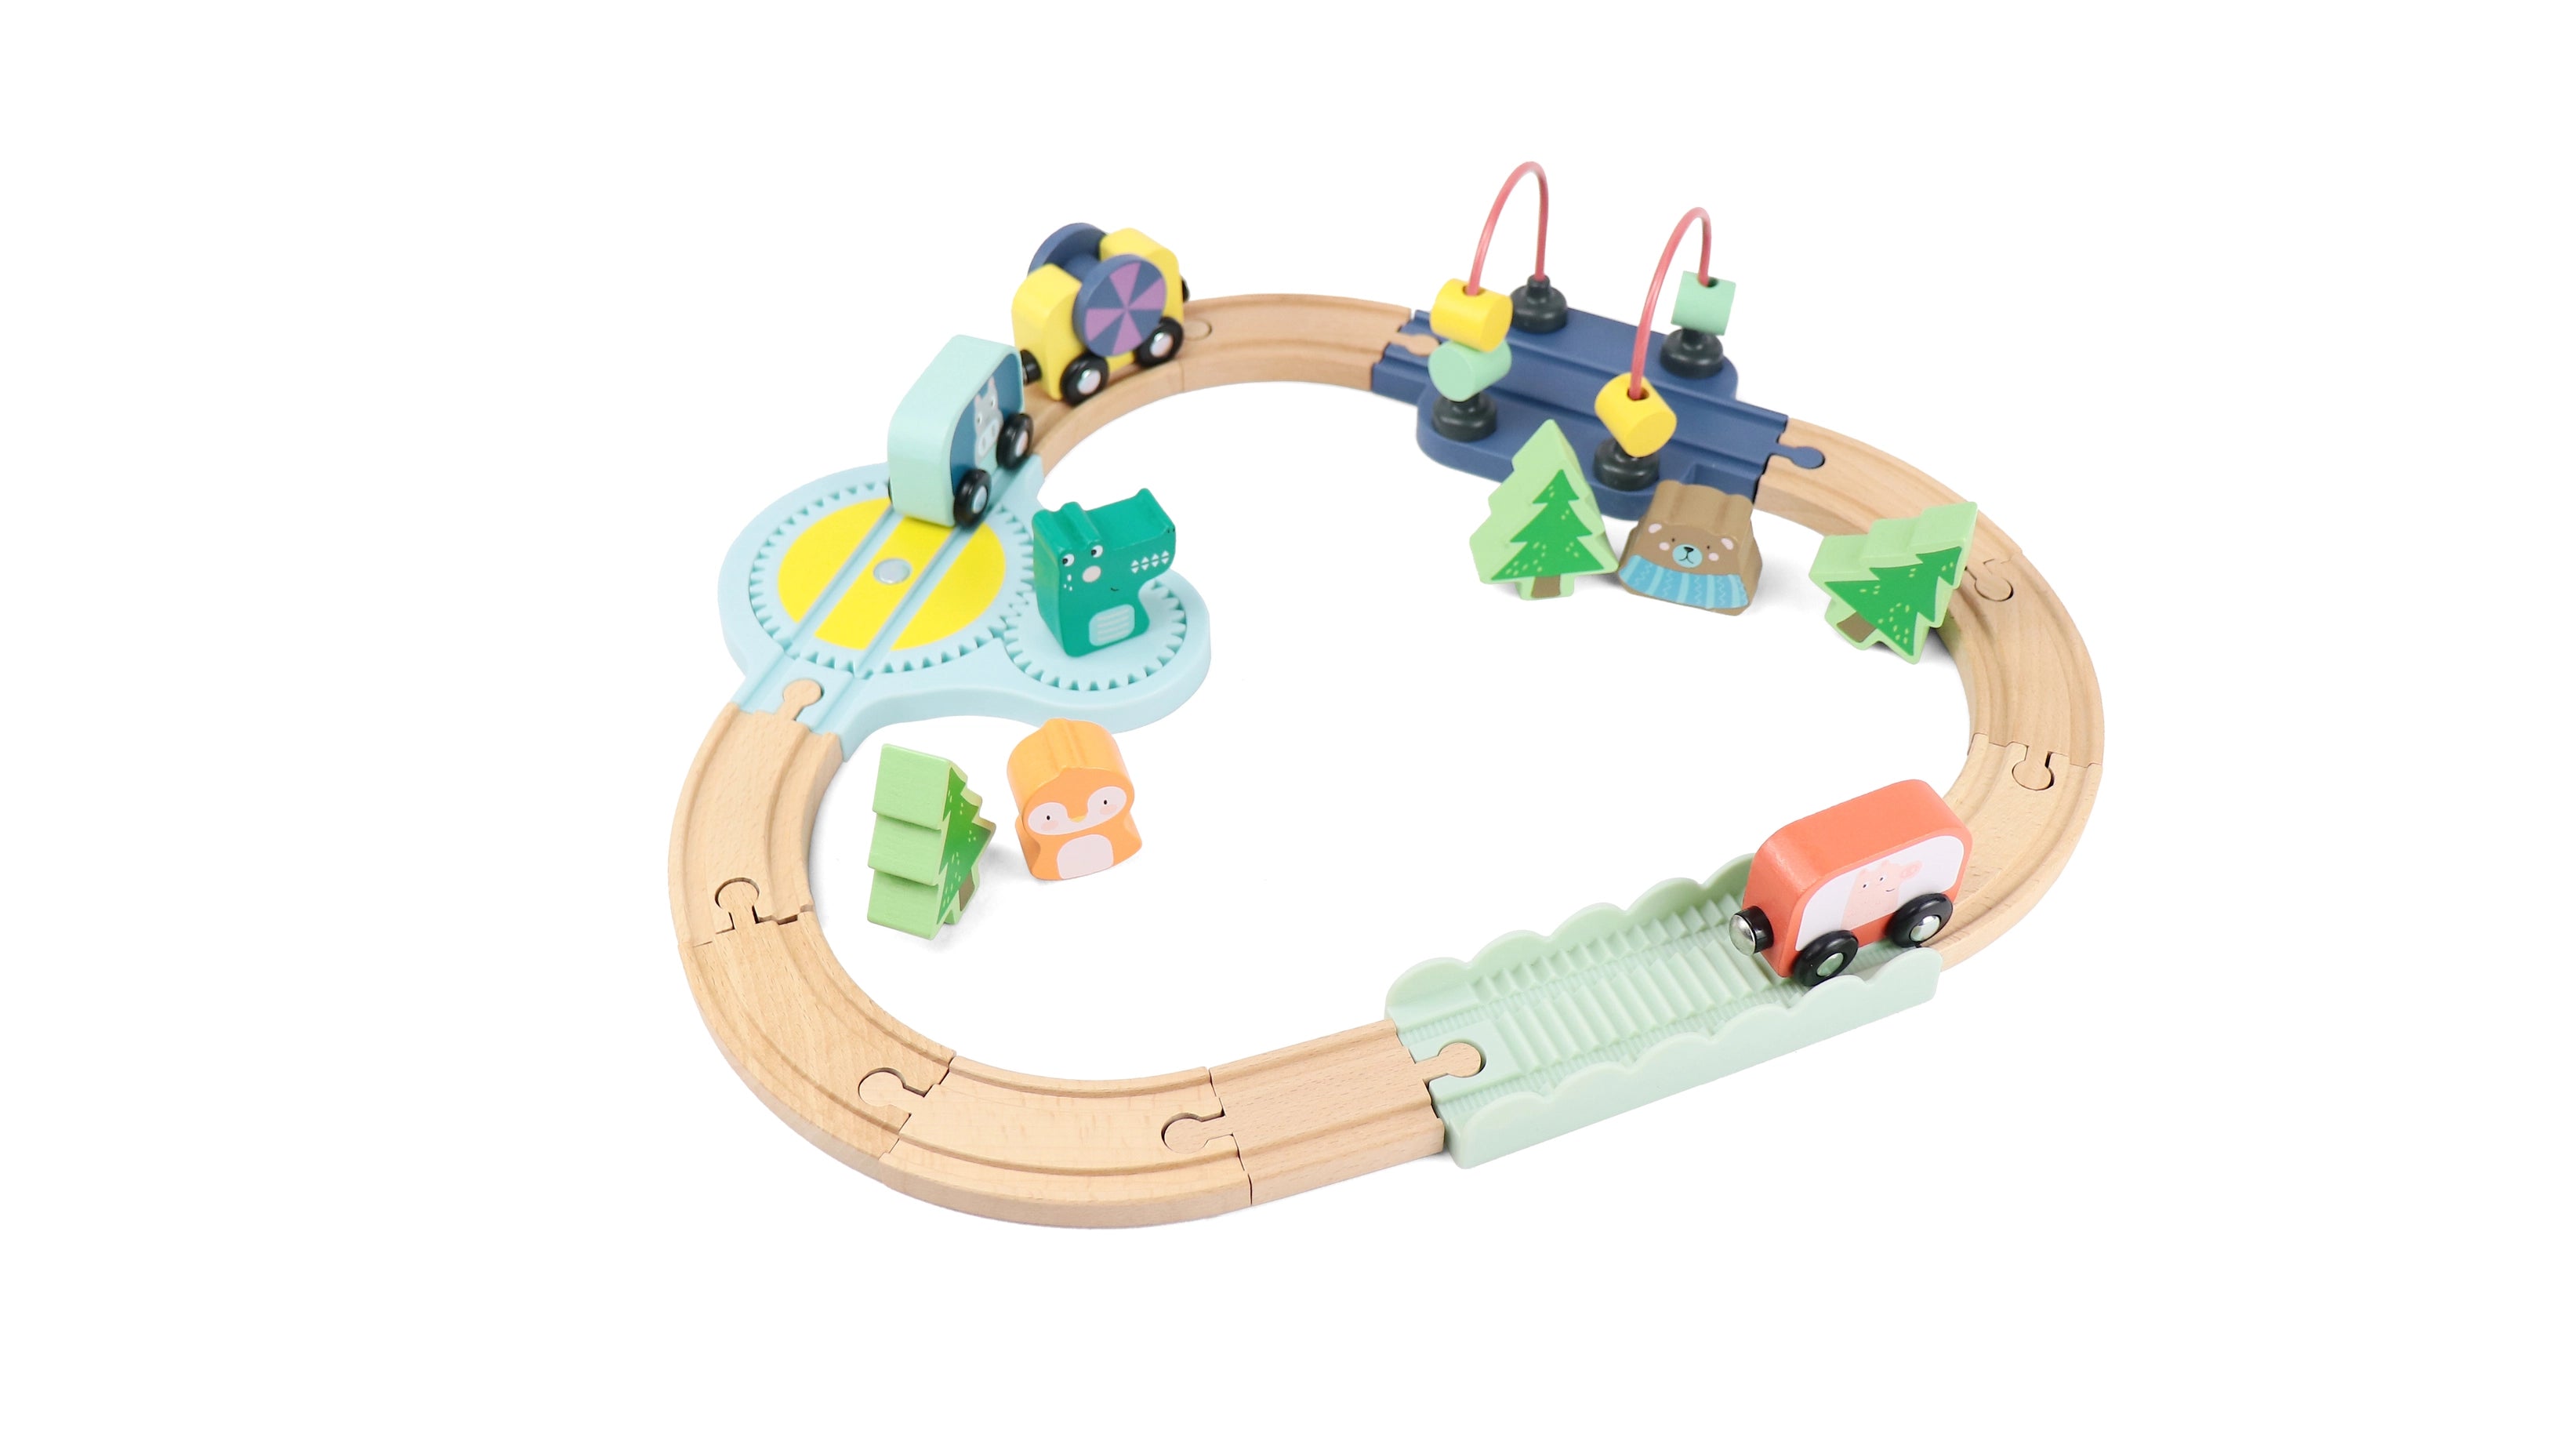 Wooden Railway Jungle 22-Piece Animal Set, Magnetic Train Cars and Puzzle Railway